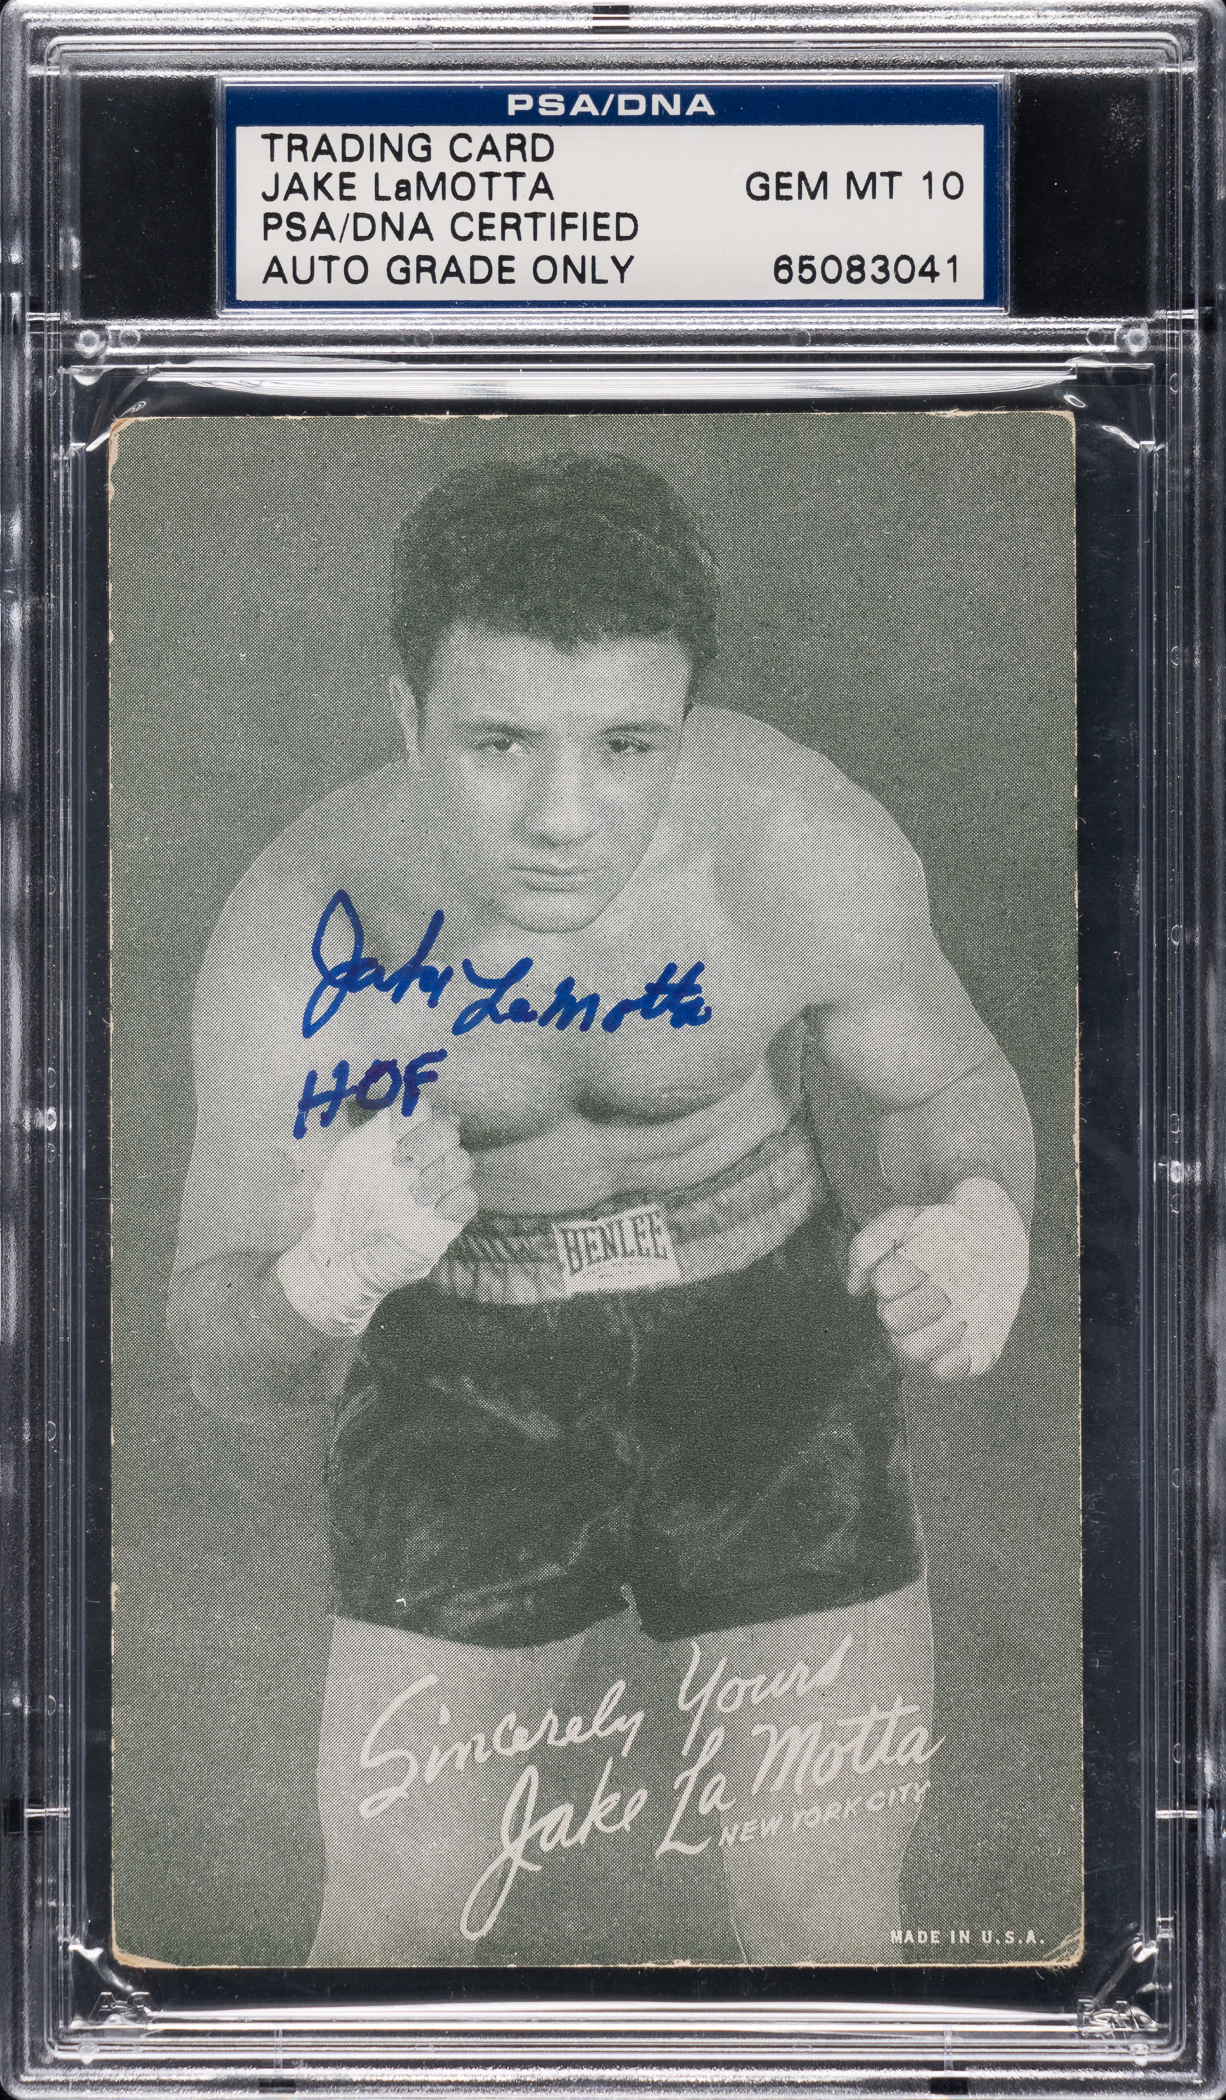 Signed 1930 Exhibits Boxing Jake LaMotta PSA/DNA GEM MINT 10. LaMotta was famously portrayed by Robert DeNiro in the movie Raging Bull.